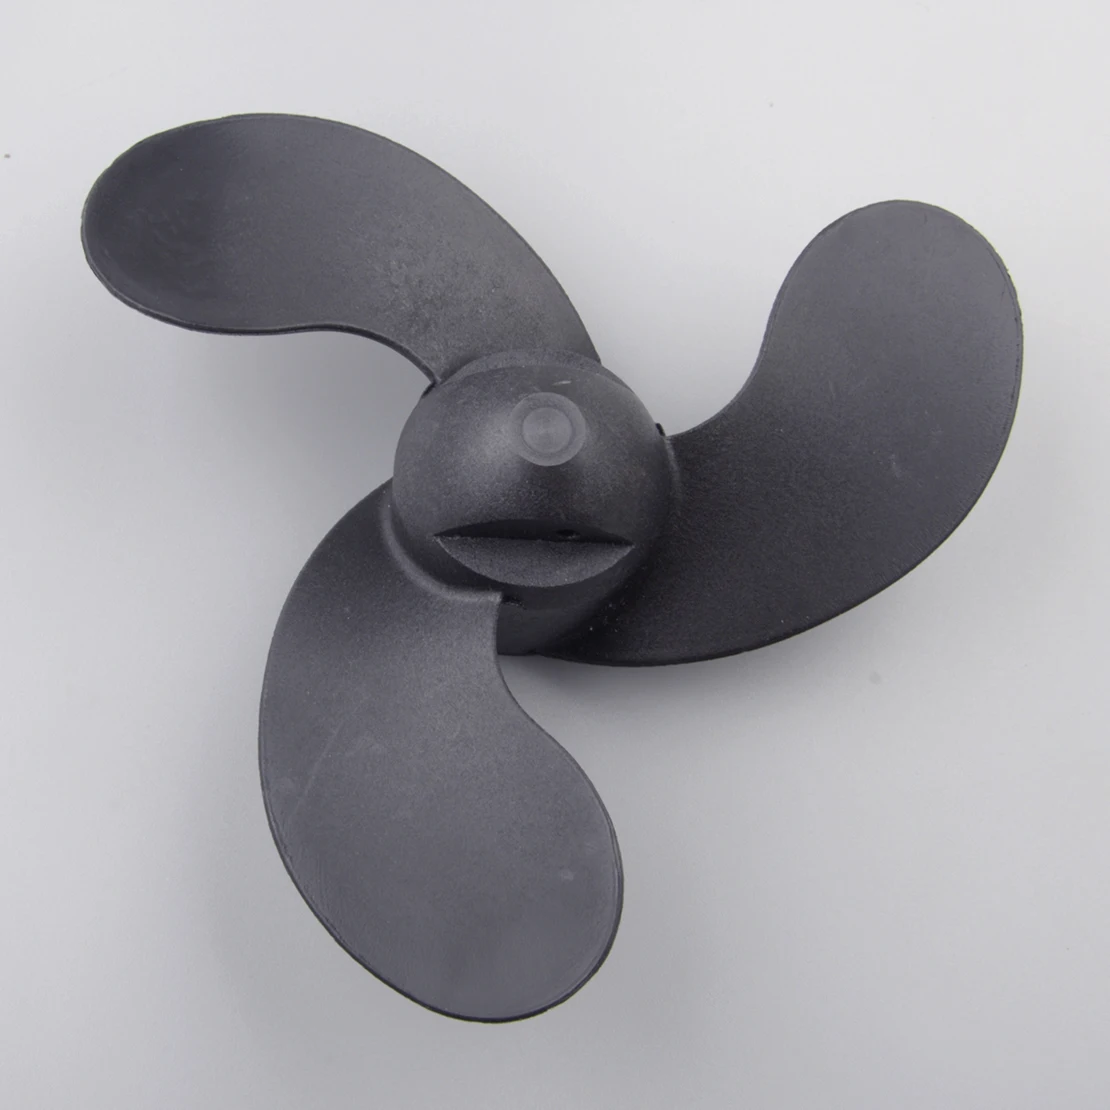 

309-64106-0 30964-1060M Boat Ship Outboard Propeller Fit for 2.5HP 3.5HP 3.3HP Black Plastic